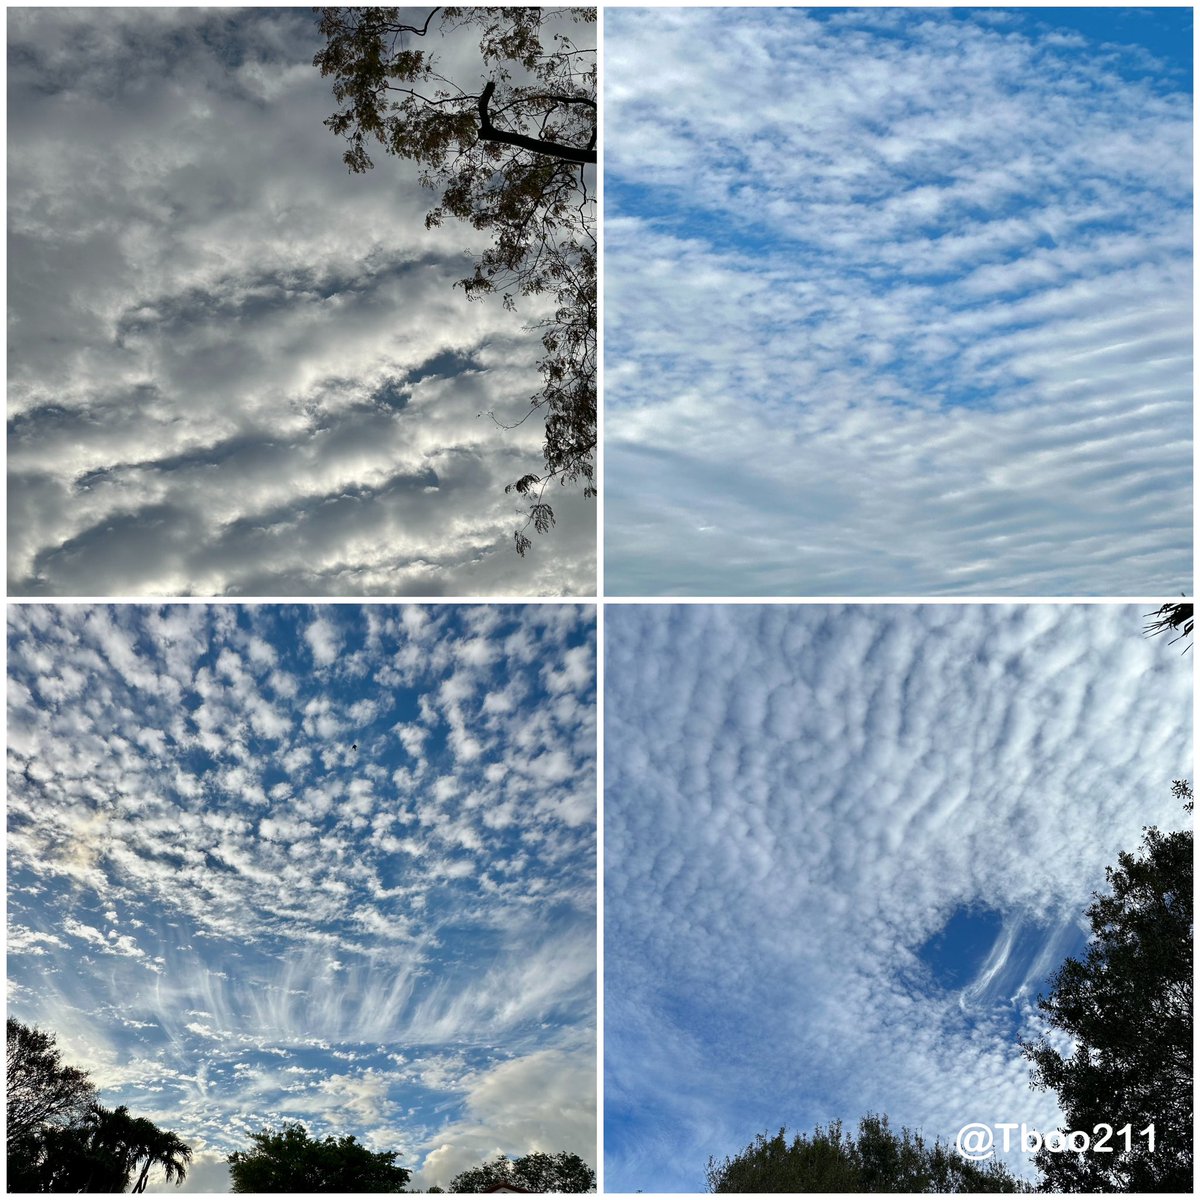 @GovRonDeSantis Please take a moment to hear from your constituents re: Weather Modification in Florida. We do not consent to any form of chemicals being sprayed in the atmosphere. (silver iodide, graphene oxide, barium, aluminum, sulfuric acid, strontium, nano plastics,…